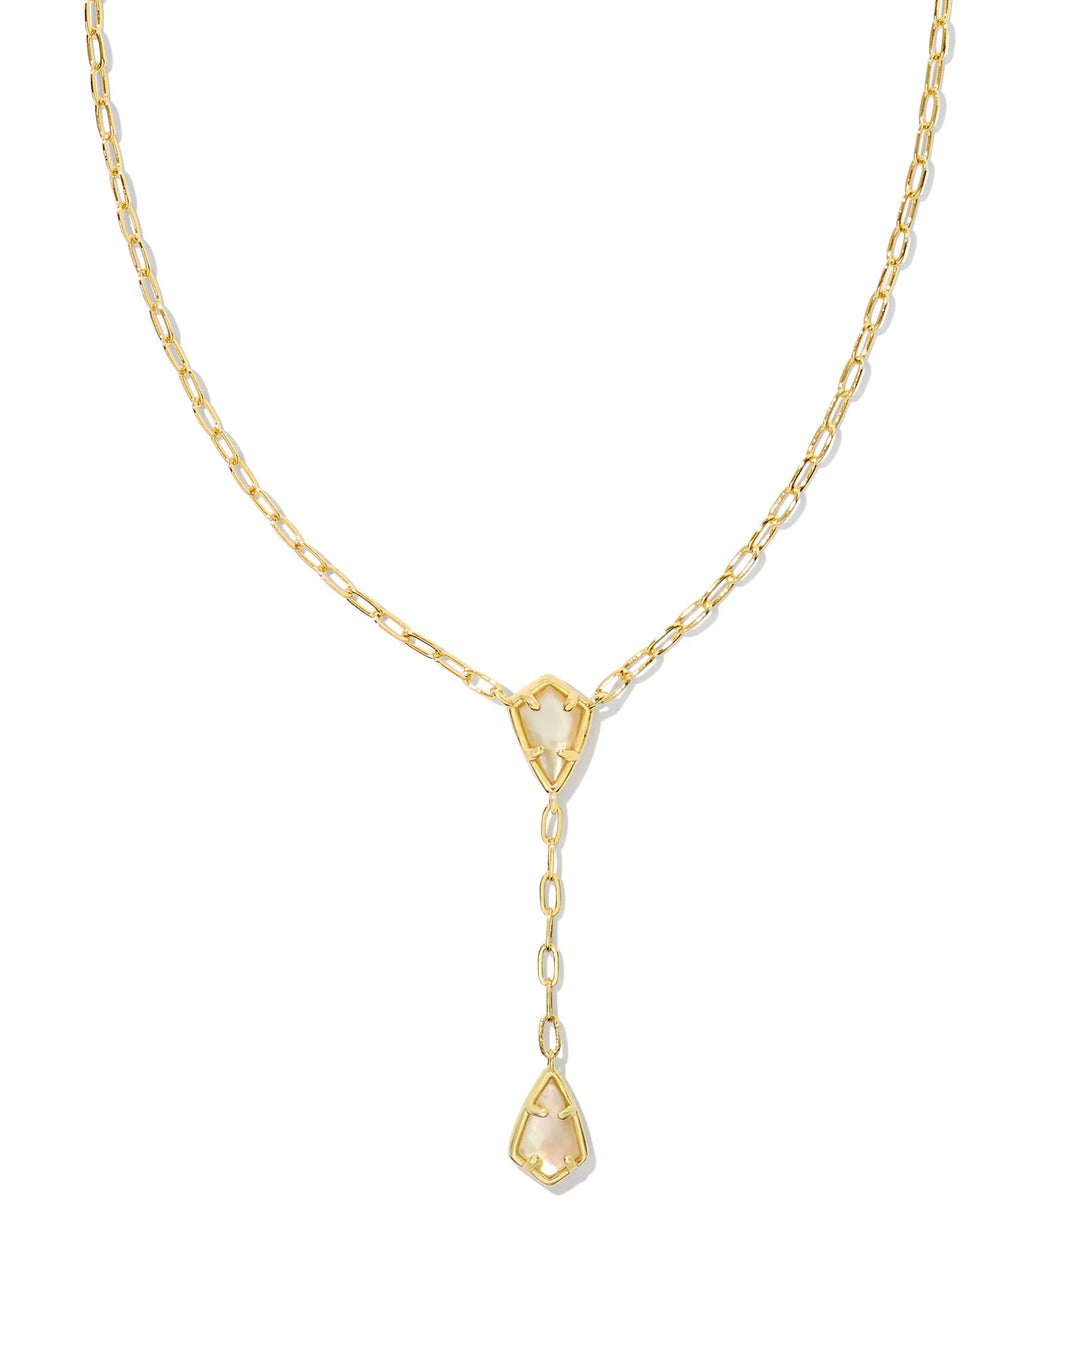 Kendra Scott Camry Y Necklace in Golden Abalone in Gold